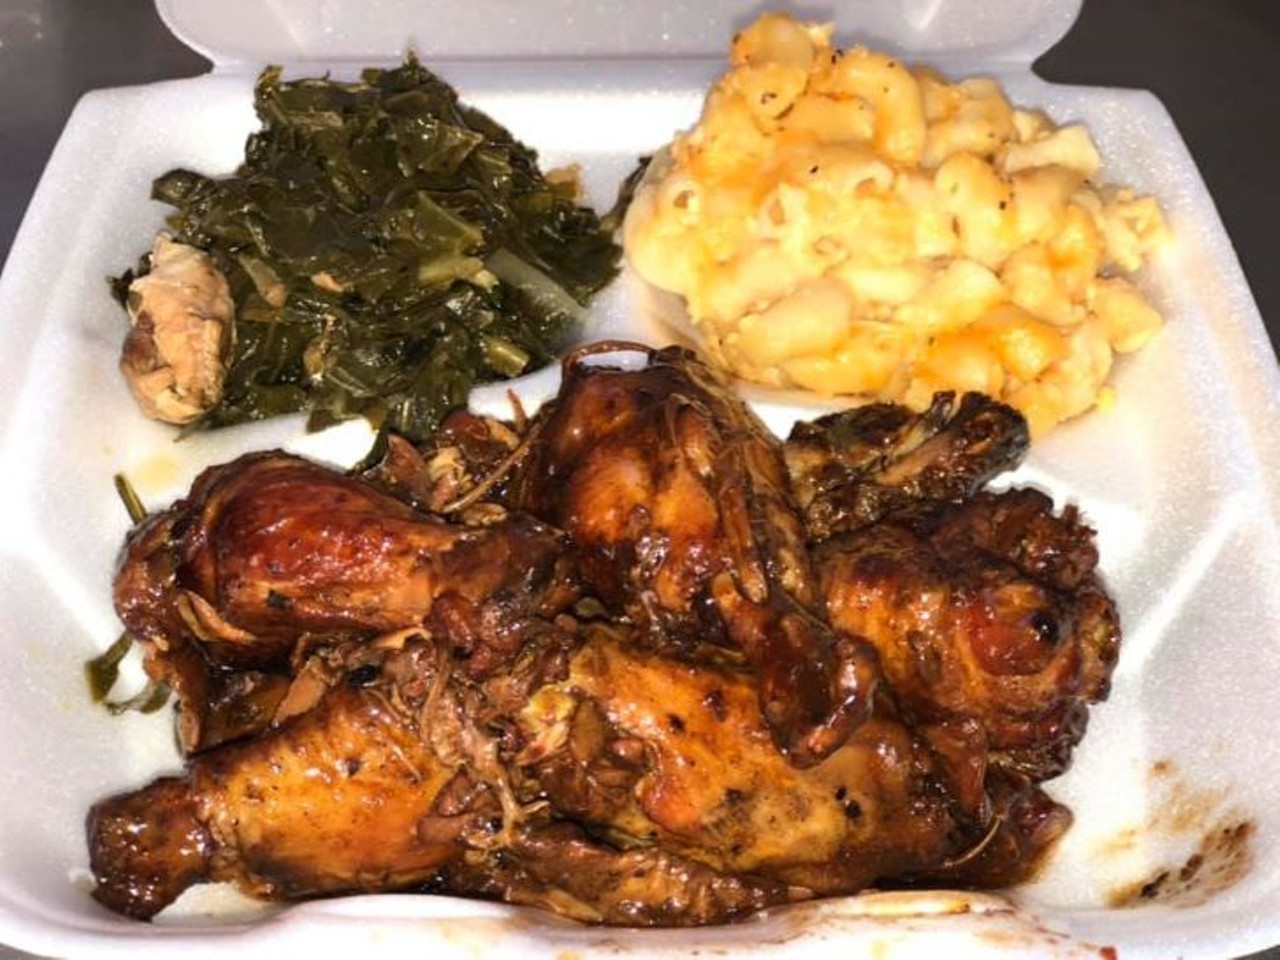 Nessa's Food Co. BBQ Restaurant 
14 W. McKey St., Ocoee, 321-370-8172
Make sure to stop by this BBQ joint where they smoke their wings with seasoned oak on the daily. Grab one of their amazing sides while you&#146;re at it too. 
Photo via Nessa's Food Co. on Facebook